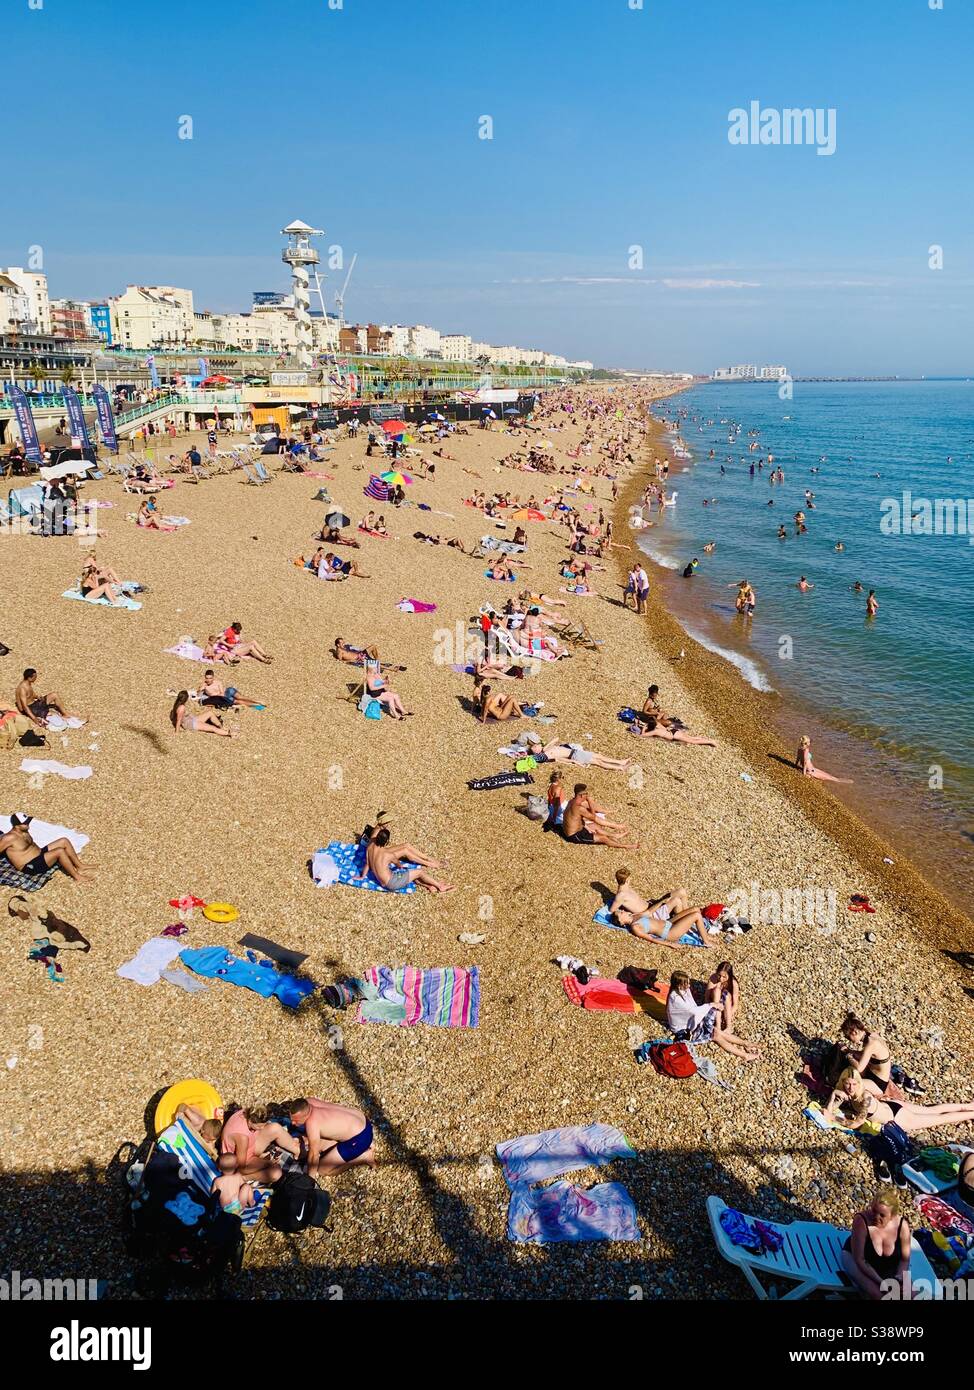 Brighton, UK - 10 August 2020: The beach busy with sunseekers in the summer heatwave. Stock Photo